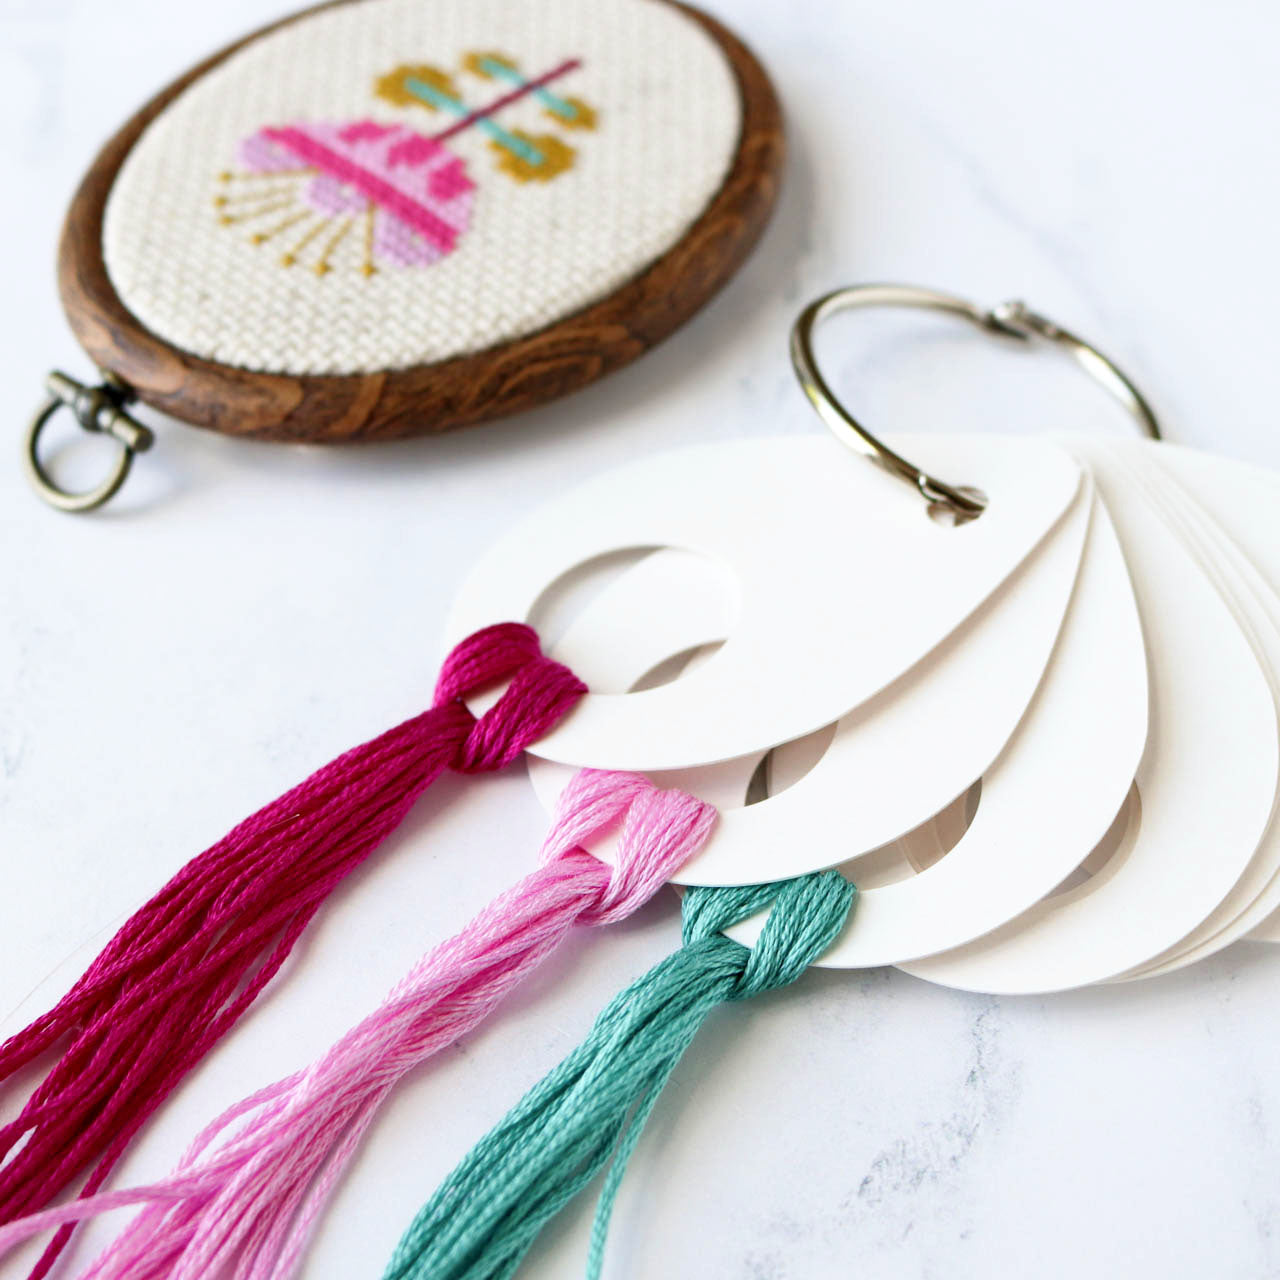 Embroidery Floss Drop Set - Farmhouse Flowers - Stitched Modern